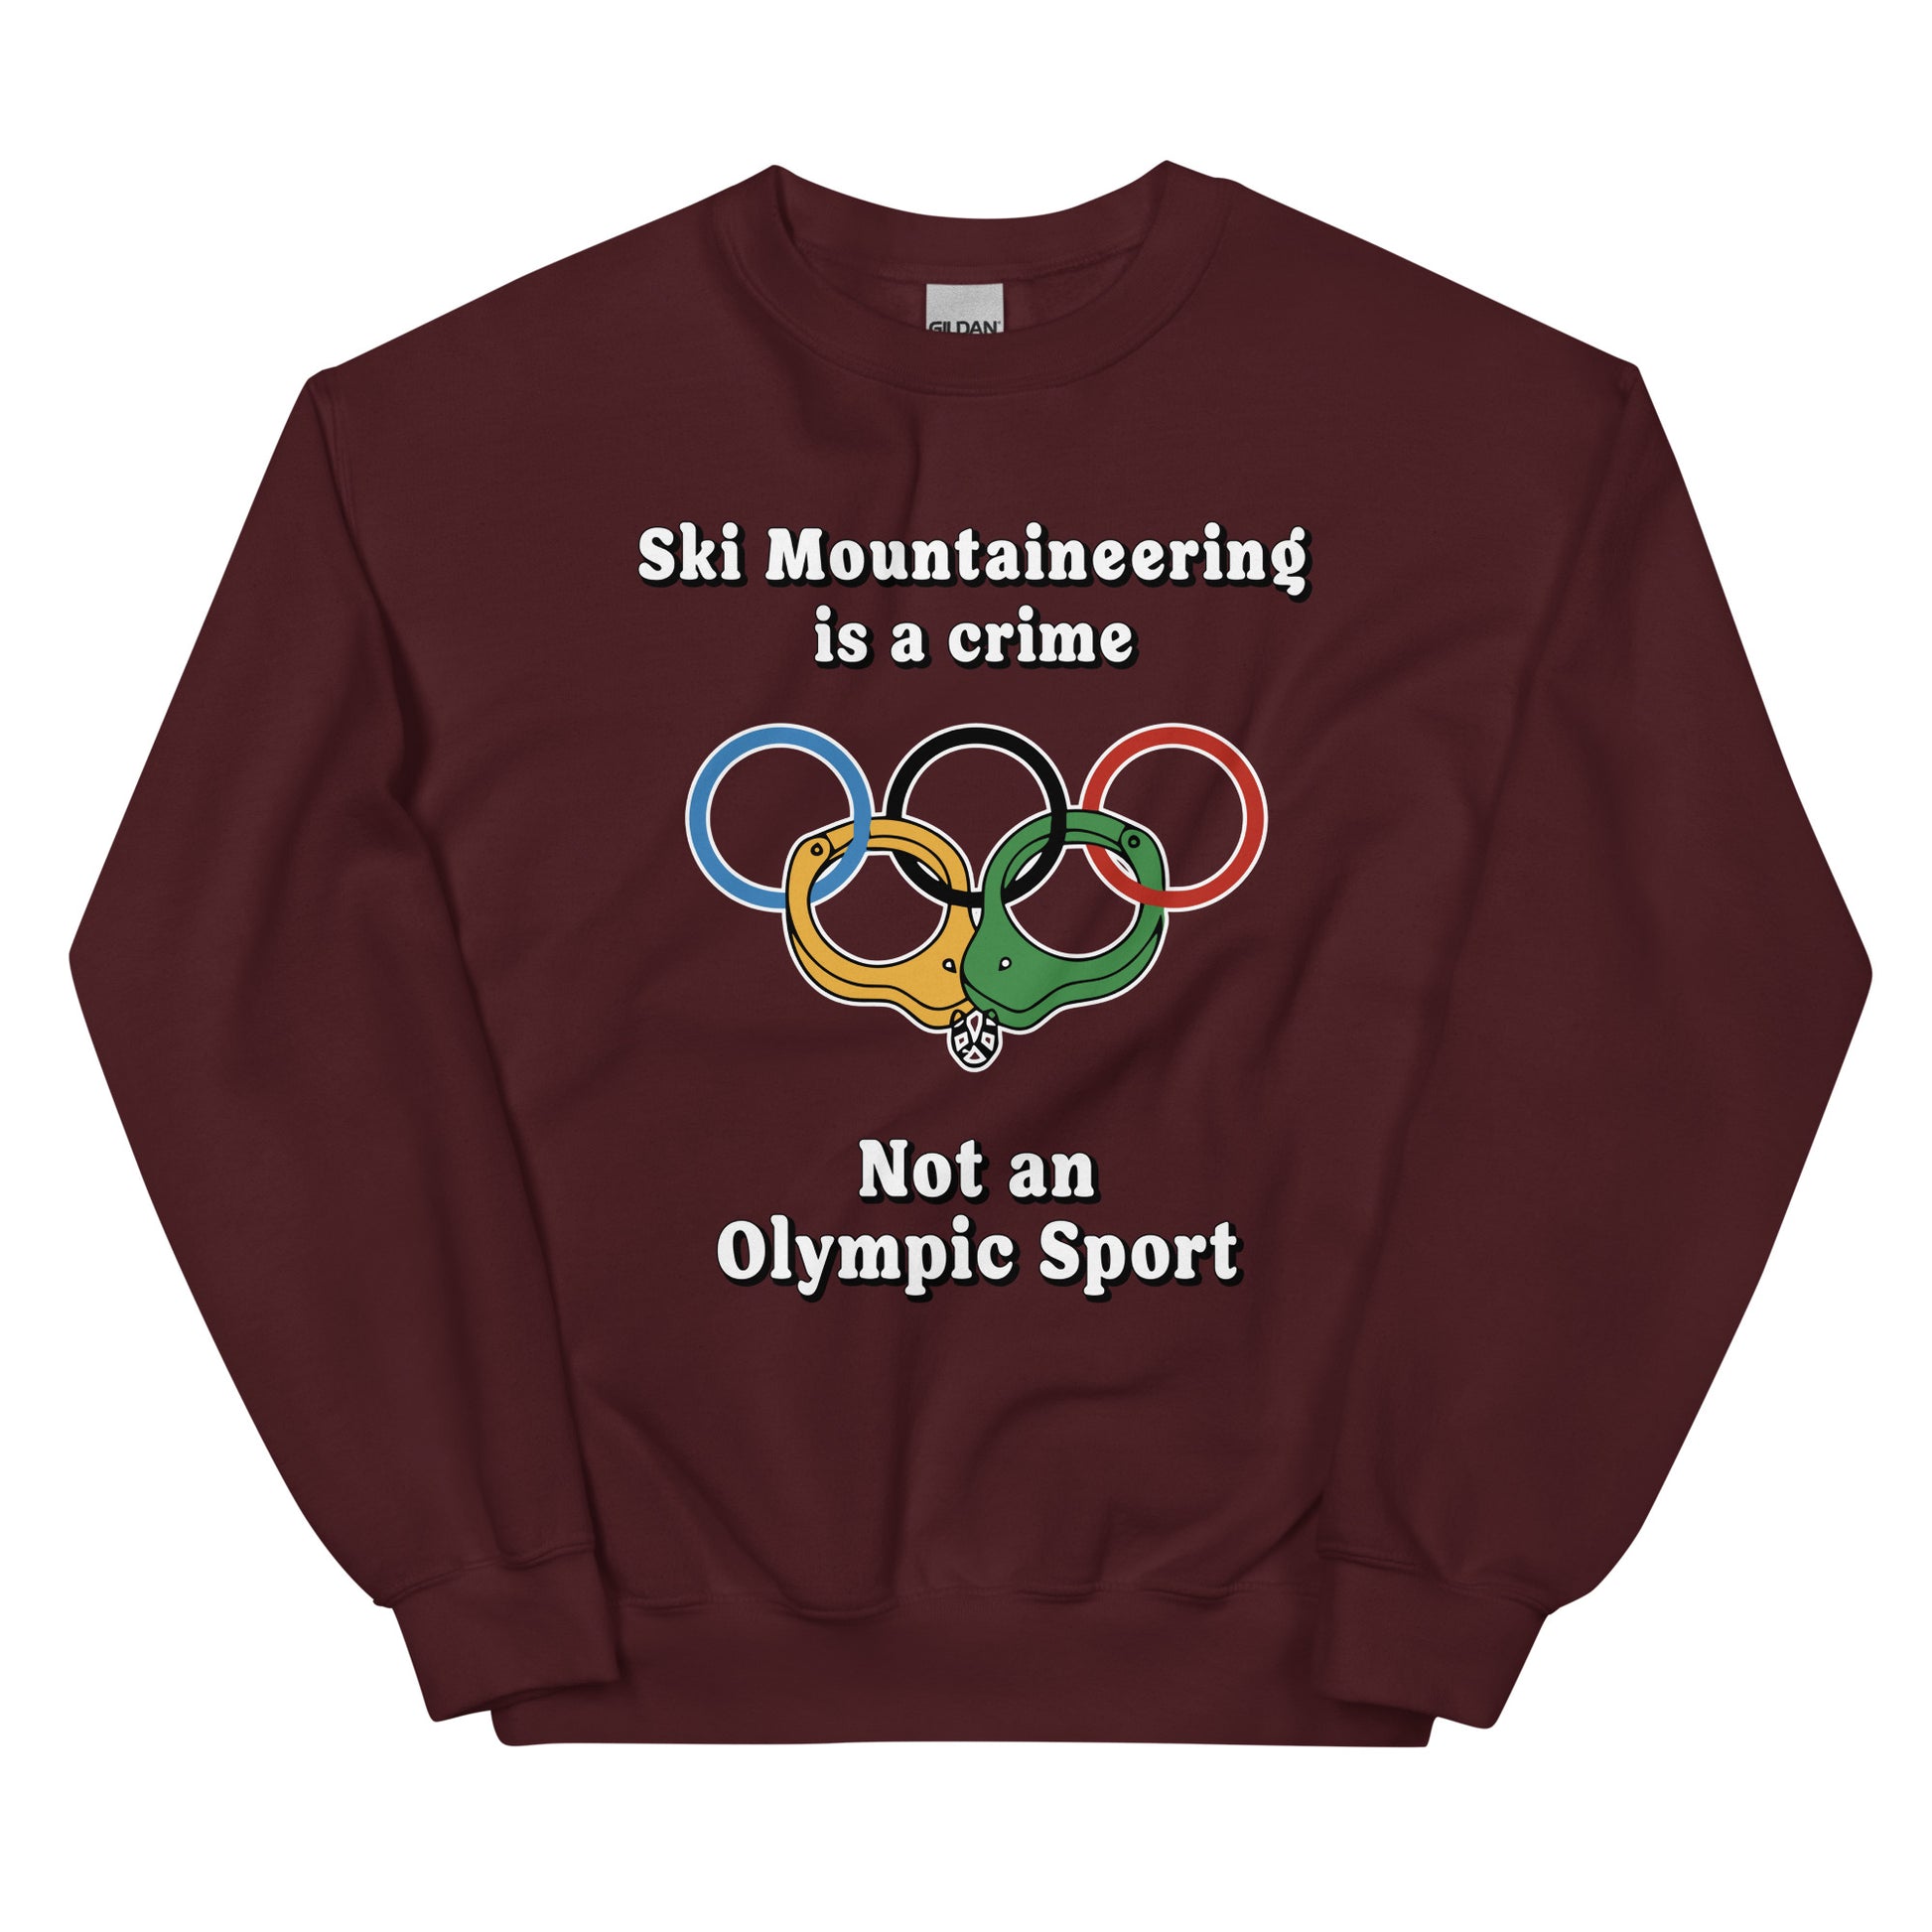 Ski Mountaineering is a crime not an olympic sport design printed on a crewneck sweatshirt by Whistler Shirts